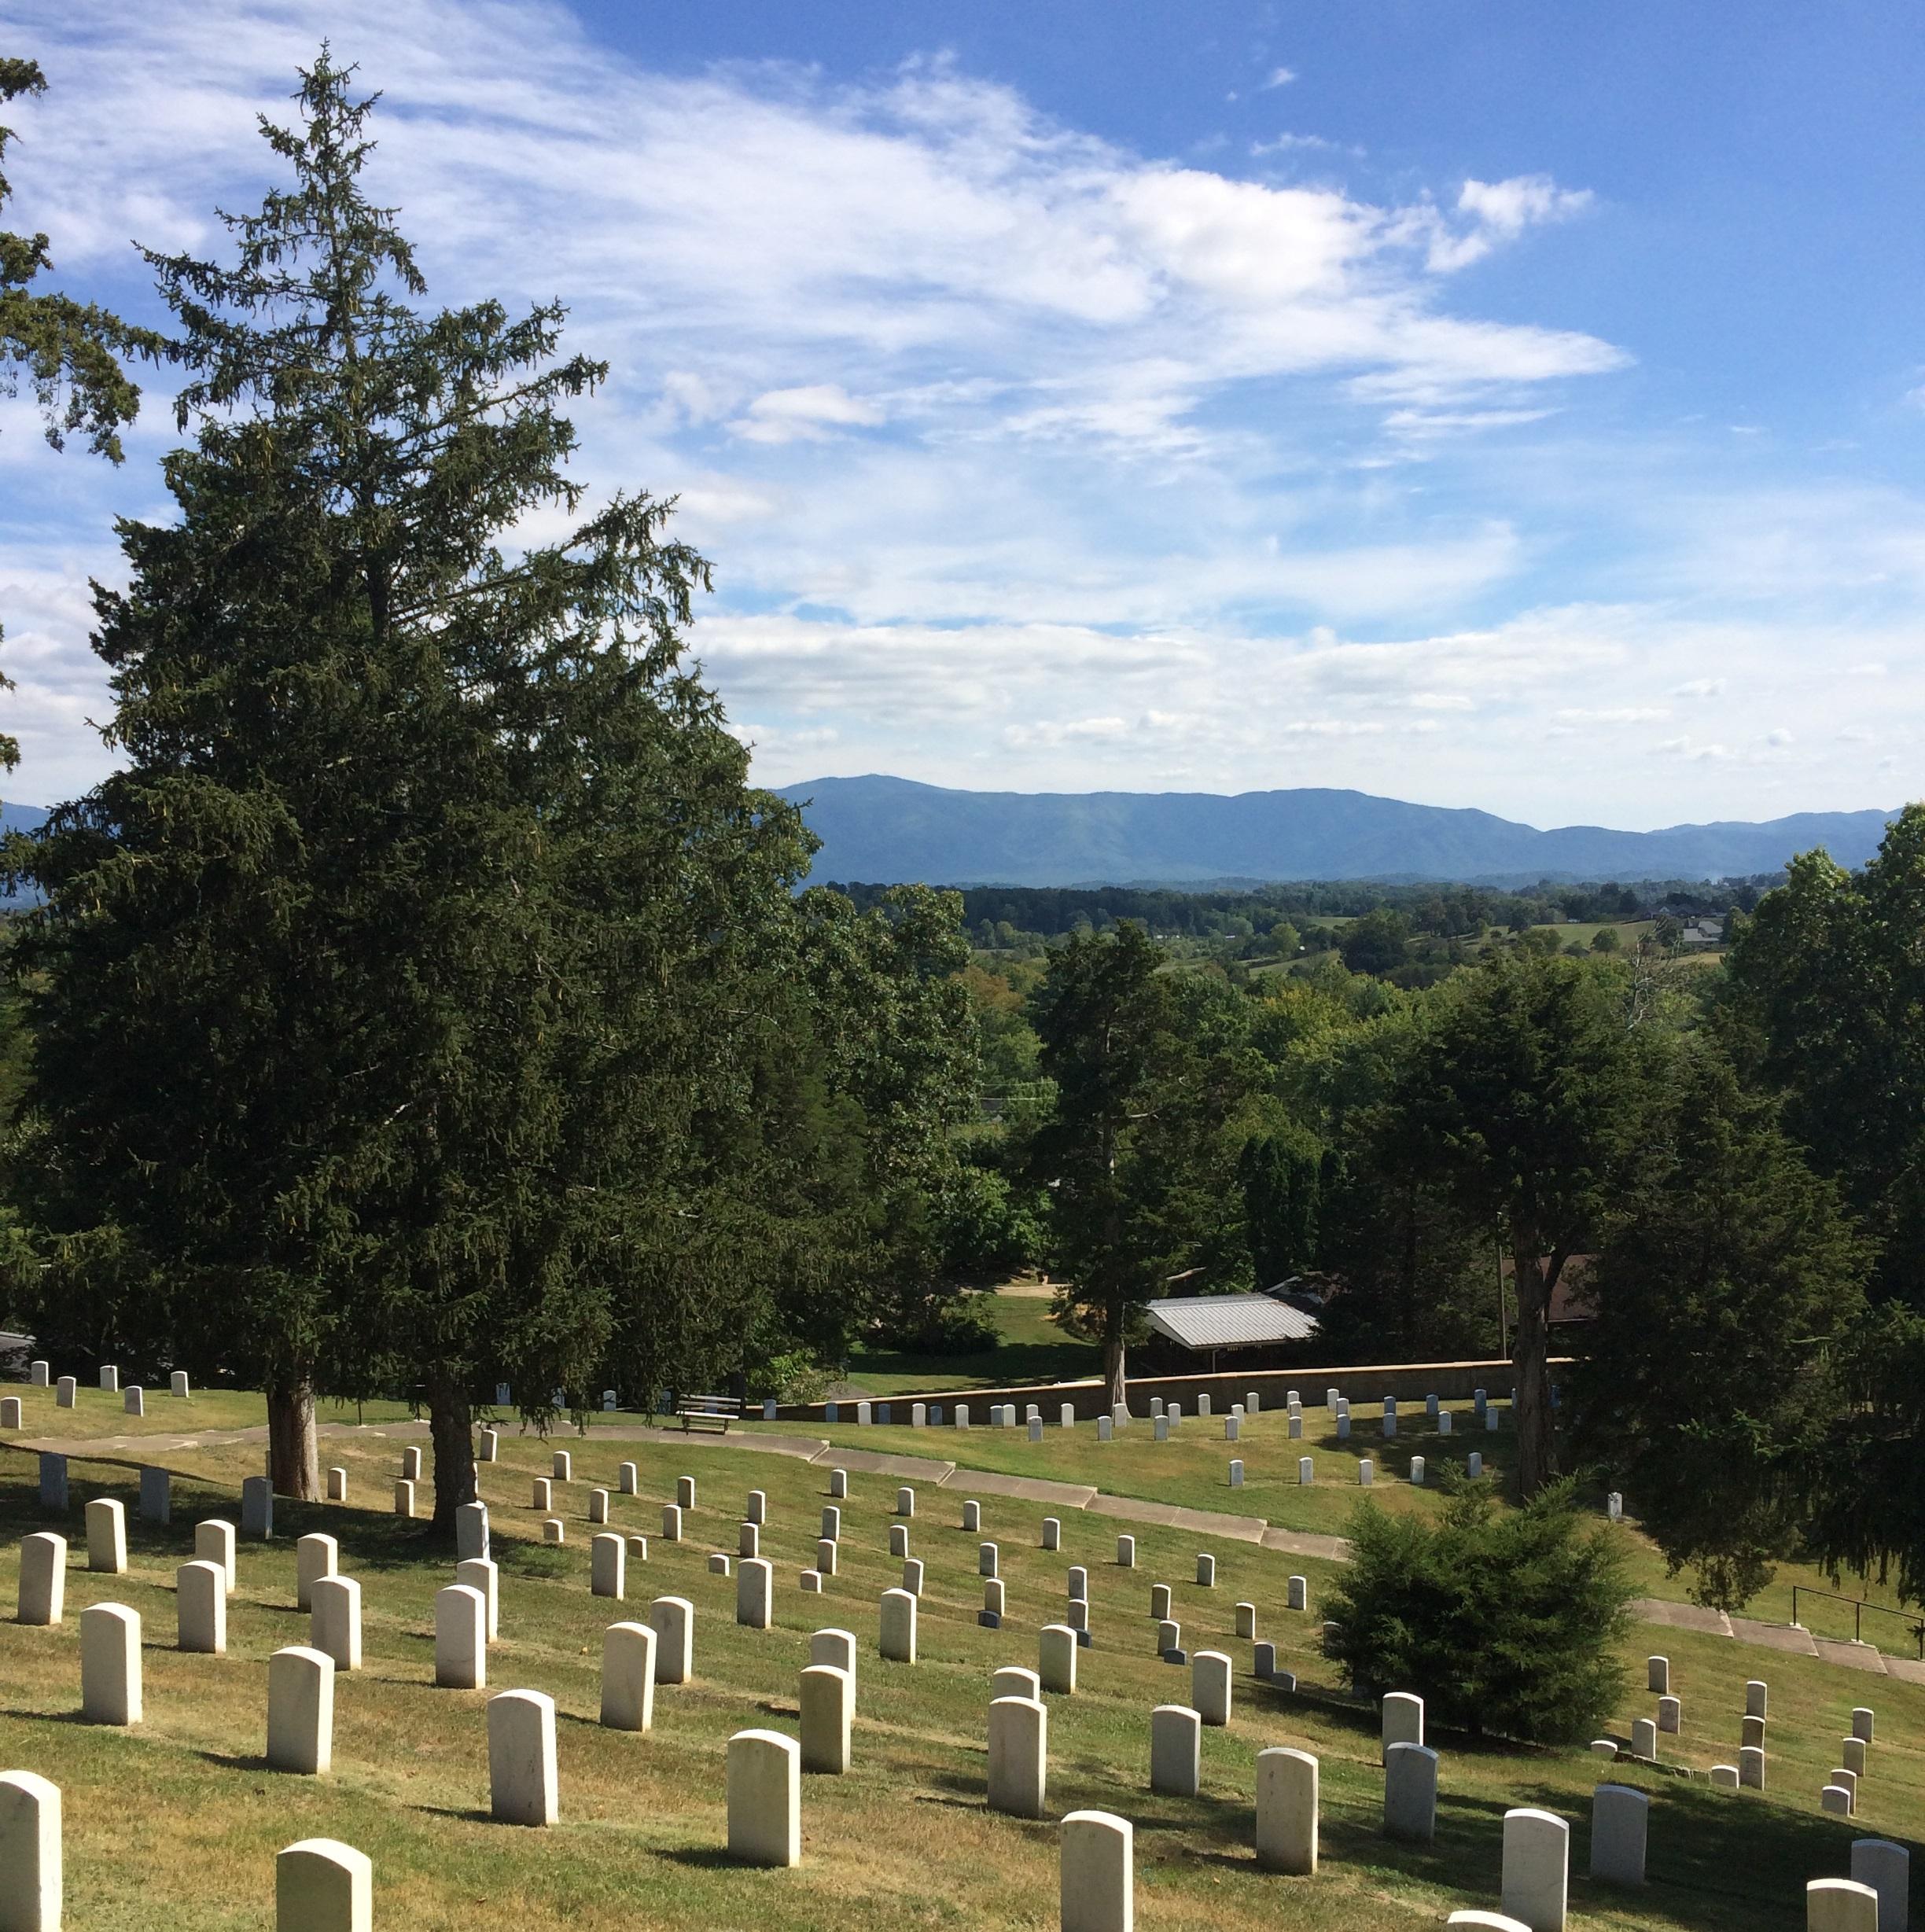 A view of Monument Hill studded with veteran headstones